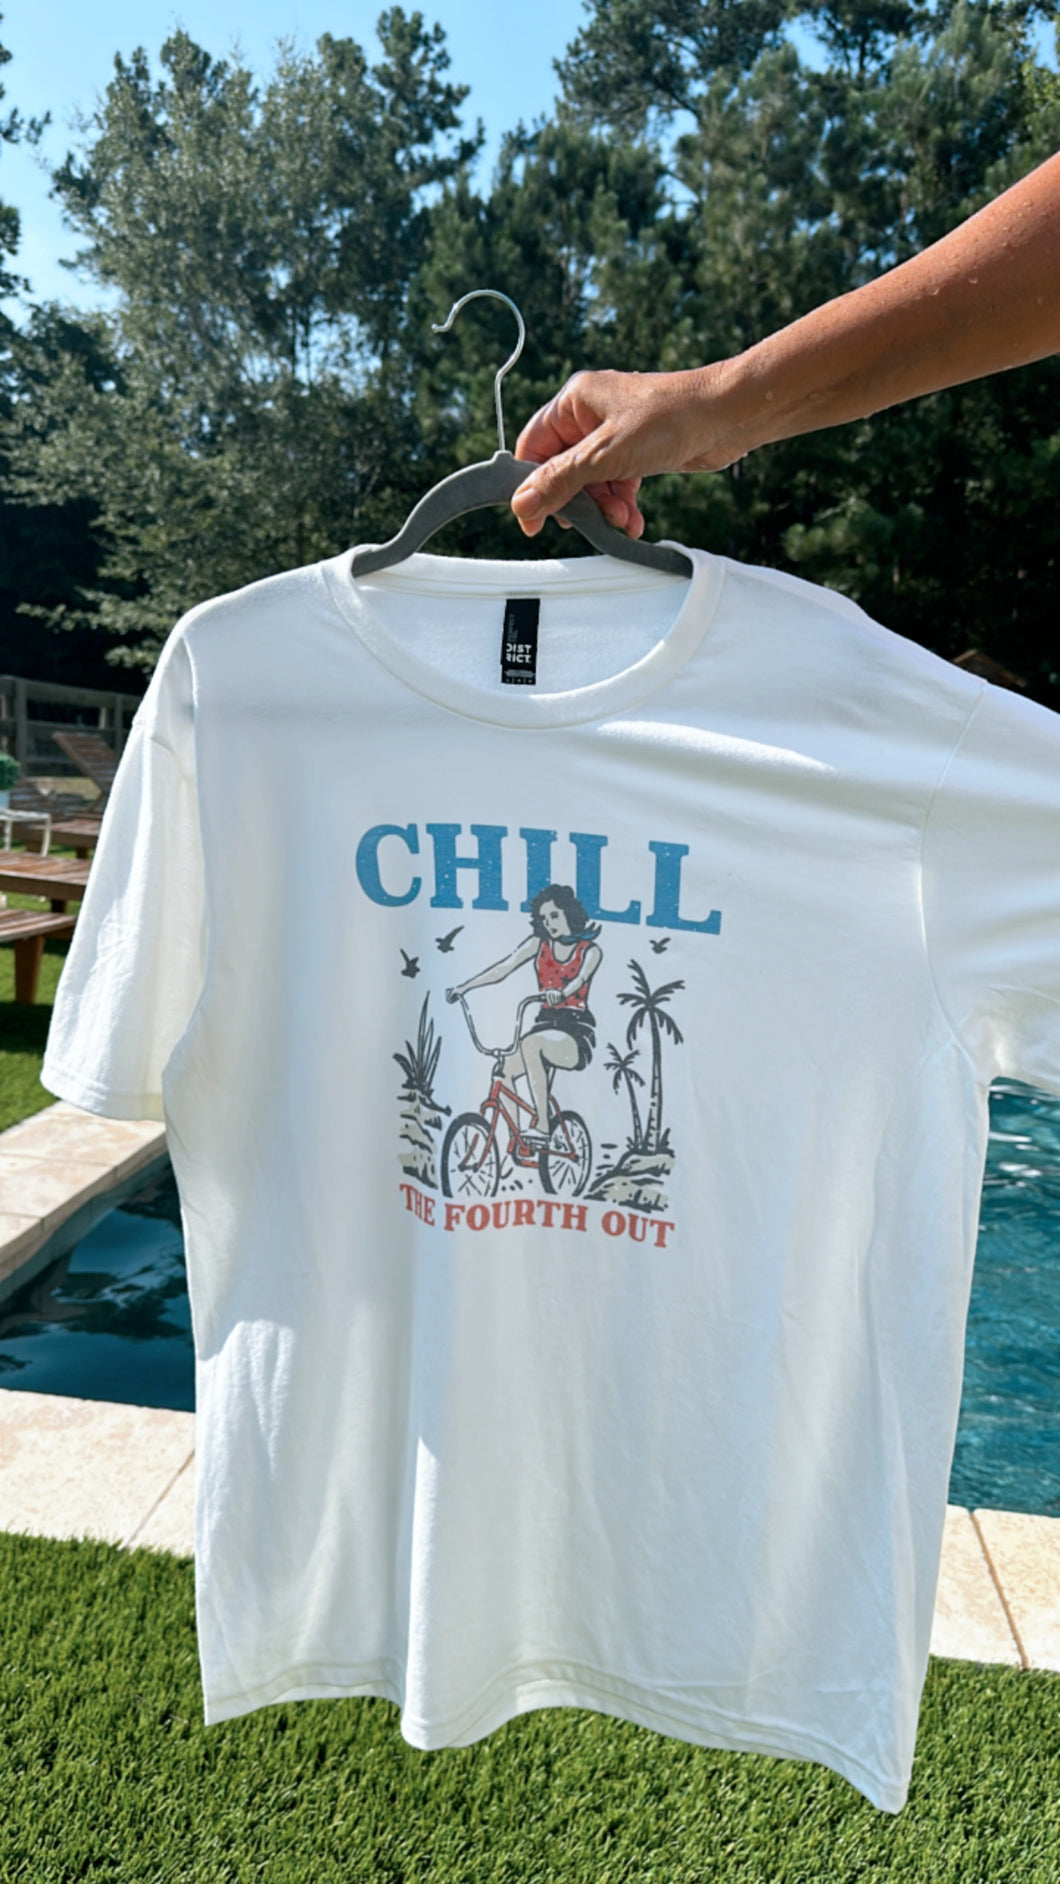 Chill the 4th out tee